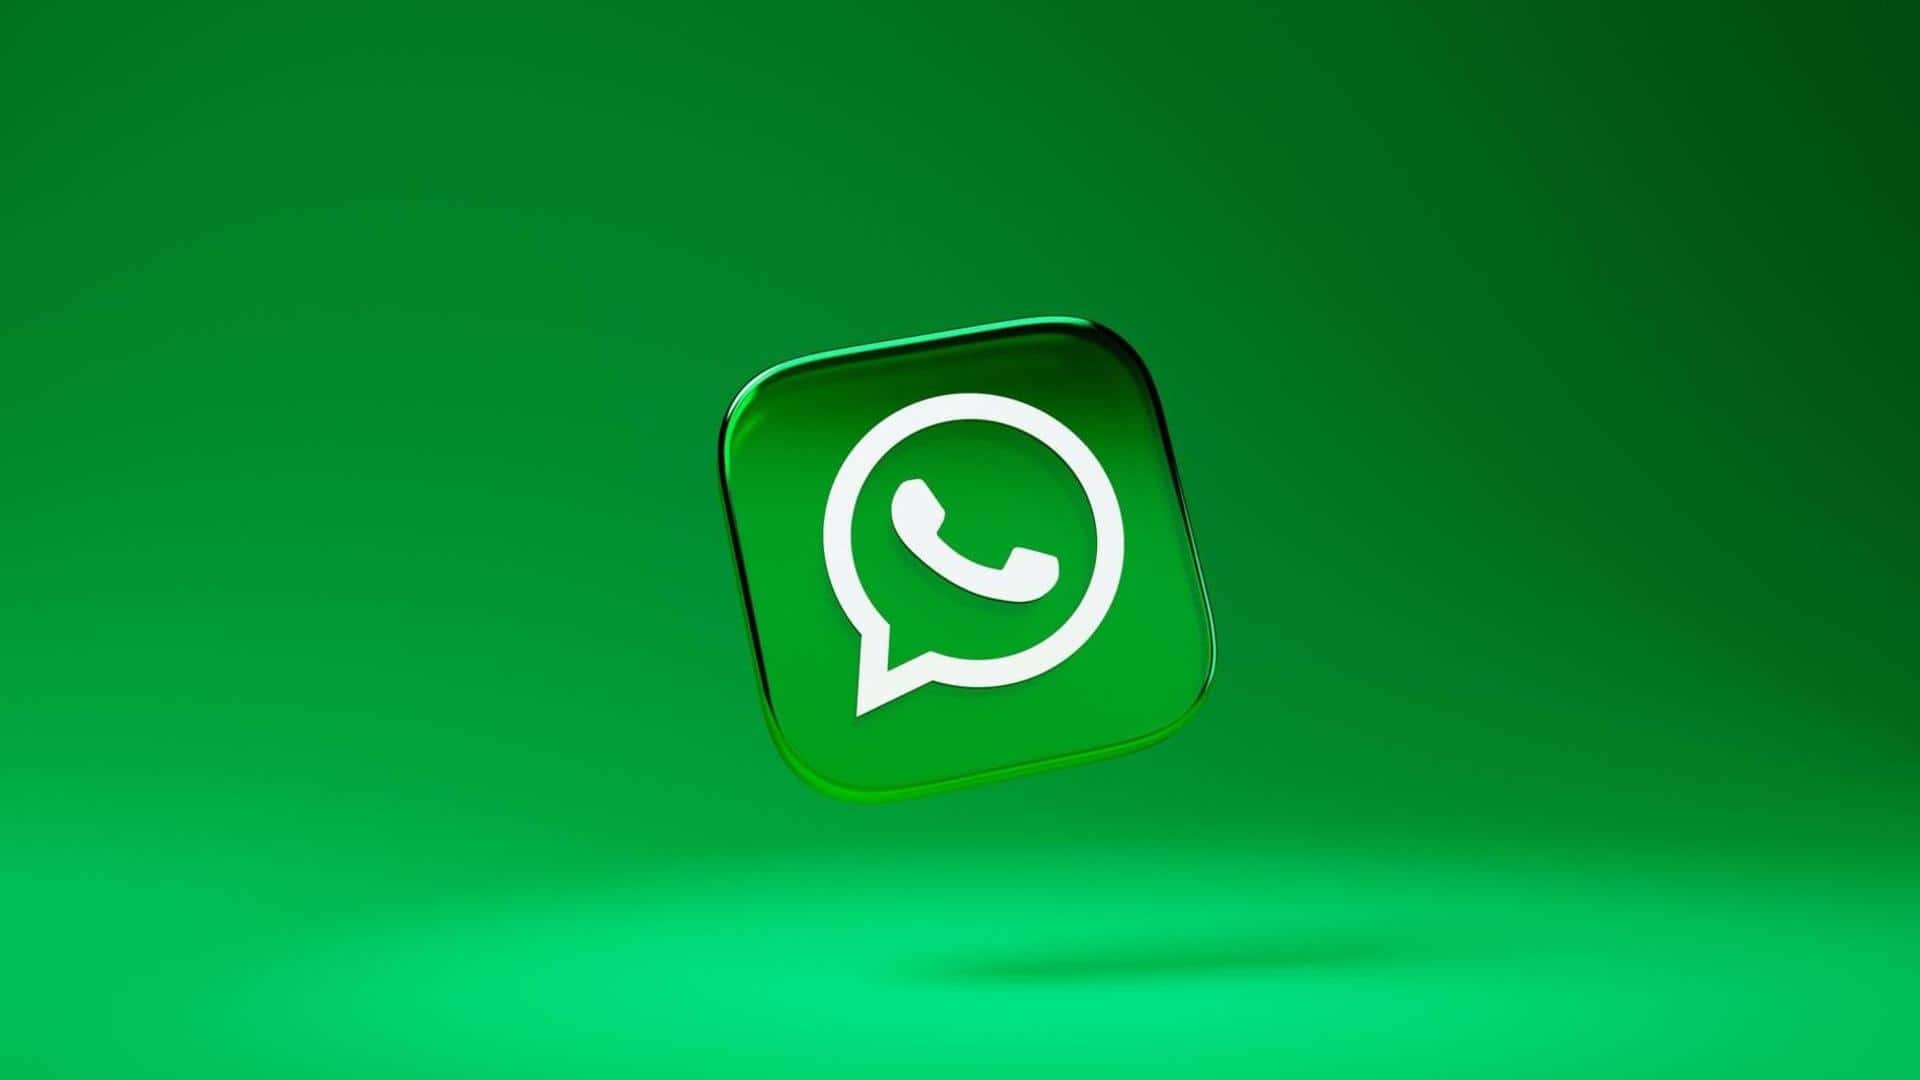 WhatsApp releases safety tool to protect users from unknown numbers